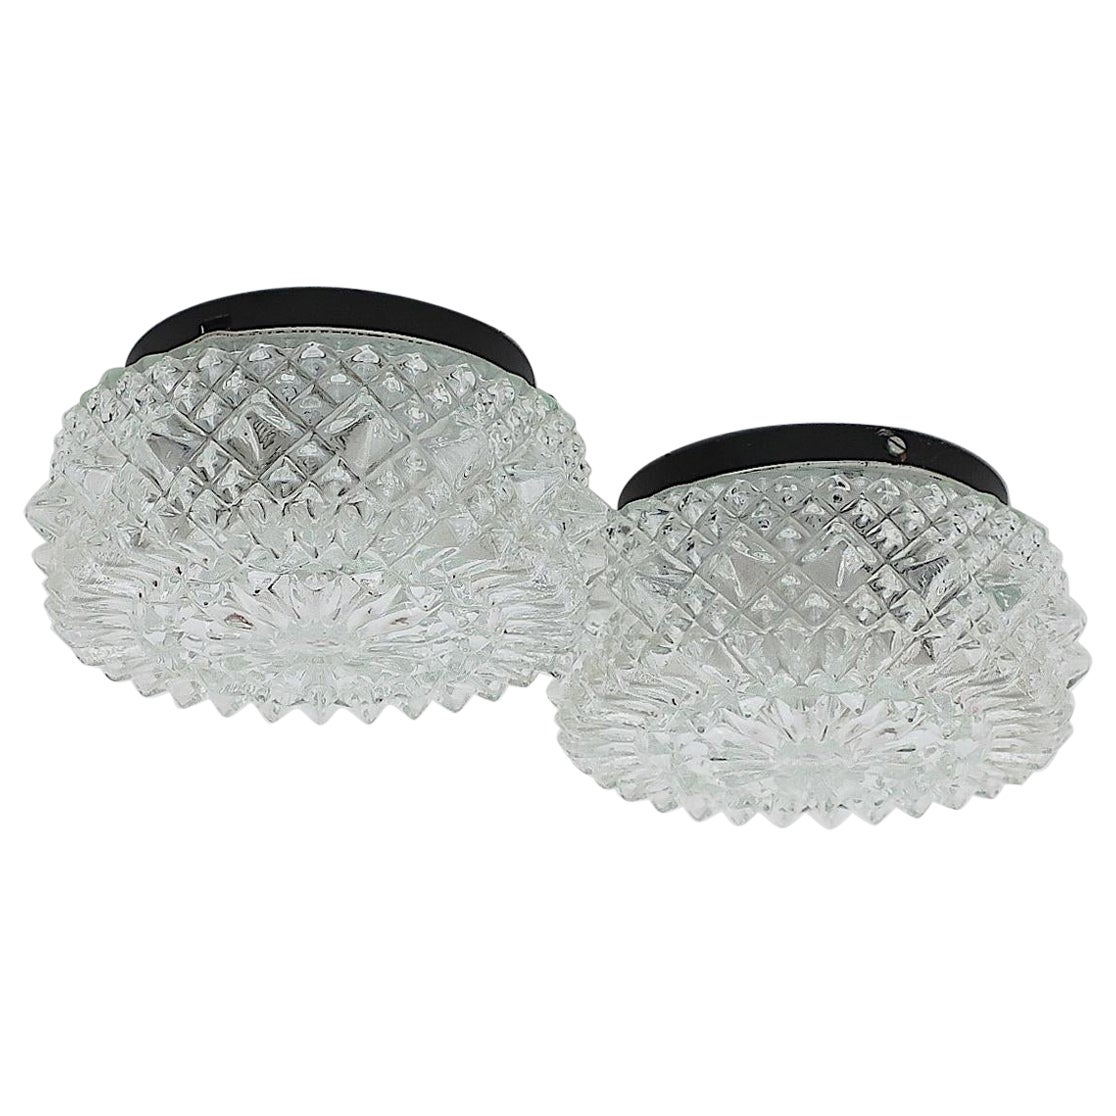 1950's RZB Round Molded Glass Fixed Ceiling Light or Wall Sconce, Germany For Sale